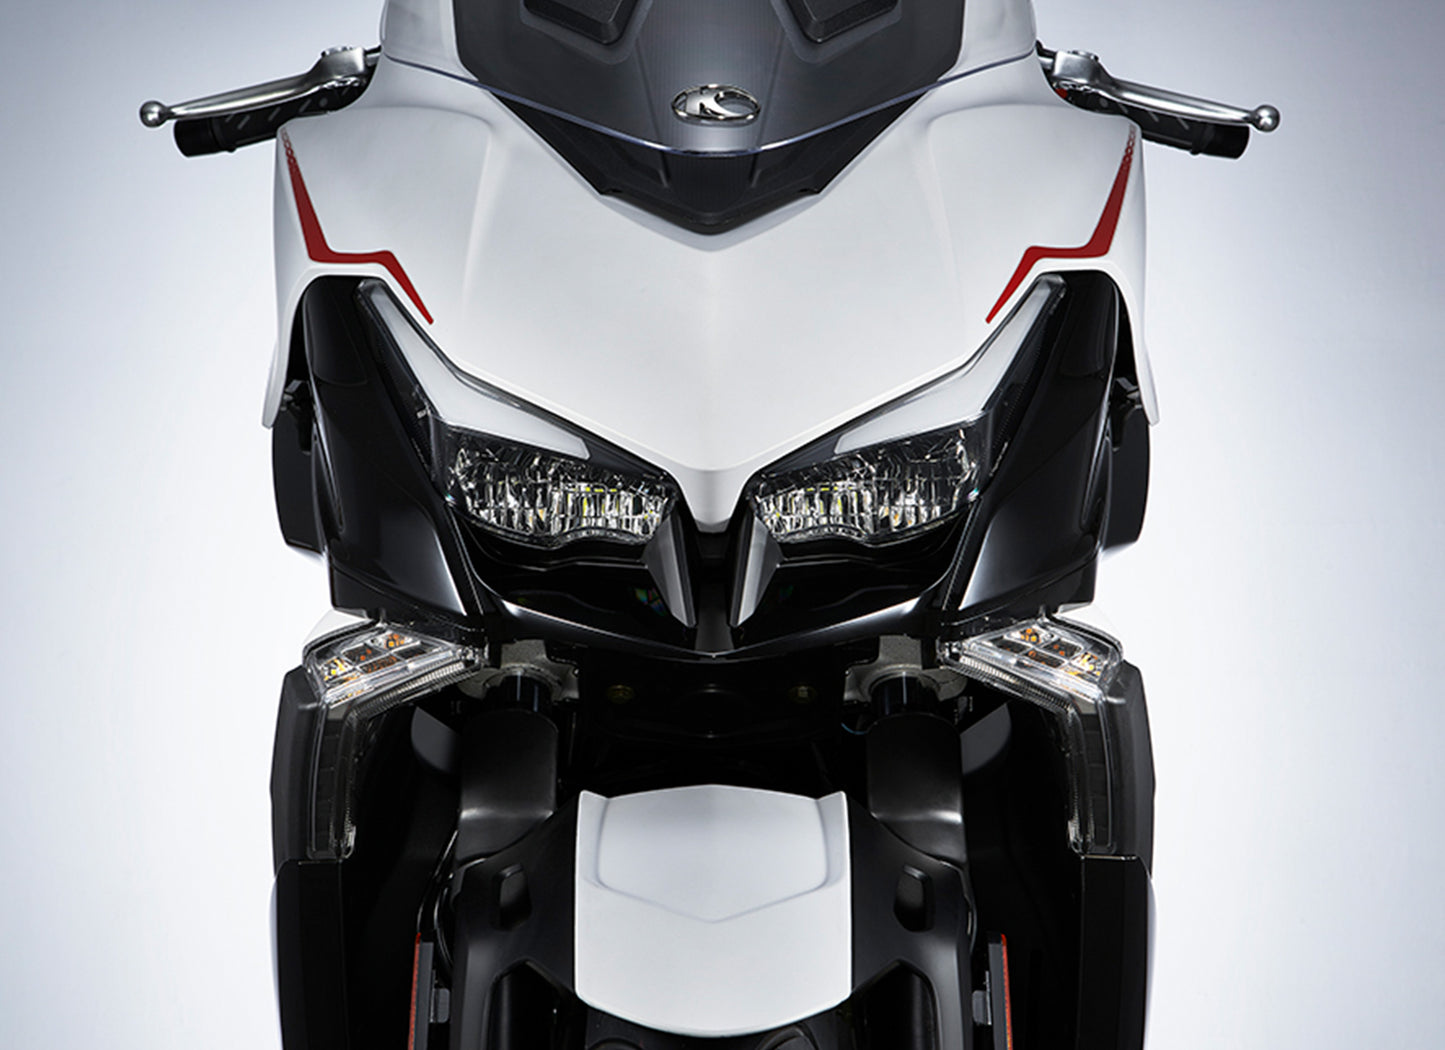 KYMCO X CITING 400 LIMITED EDITION